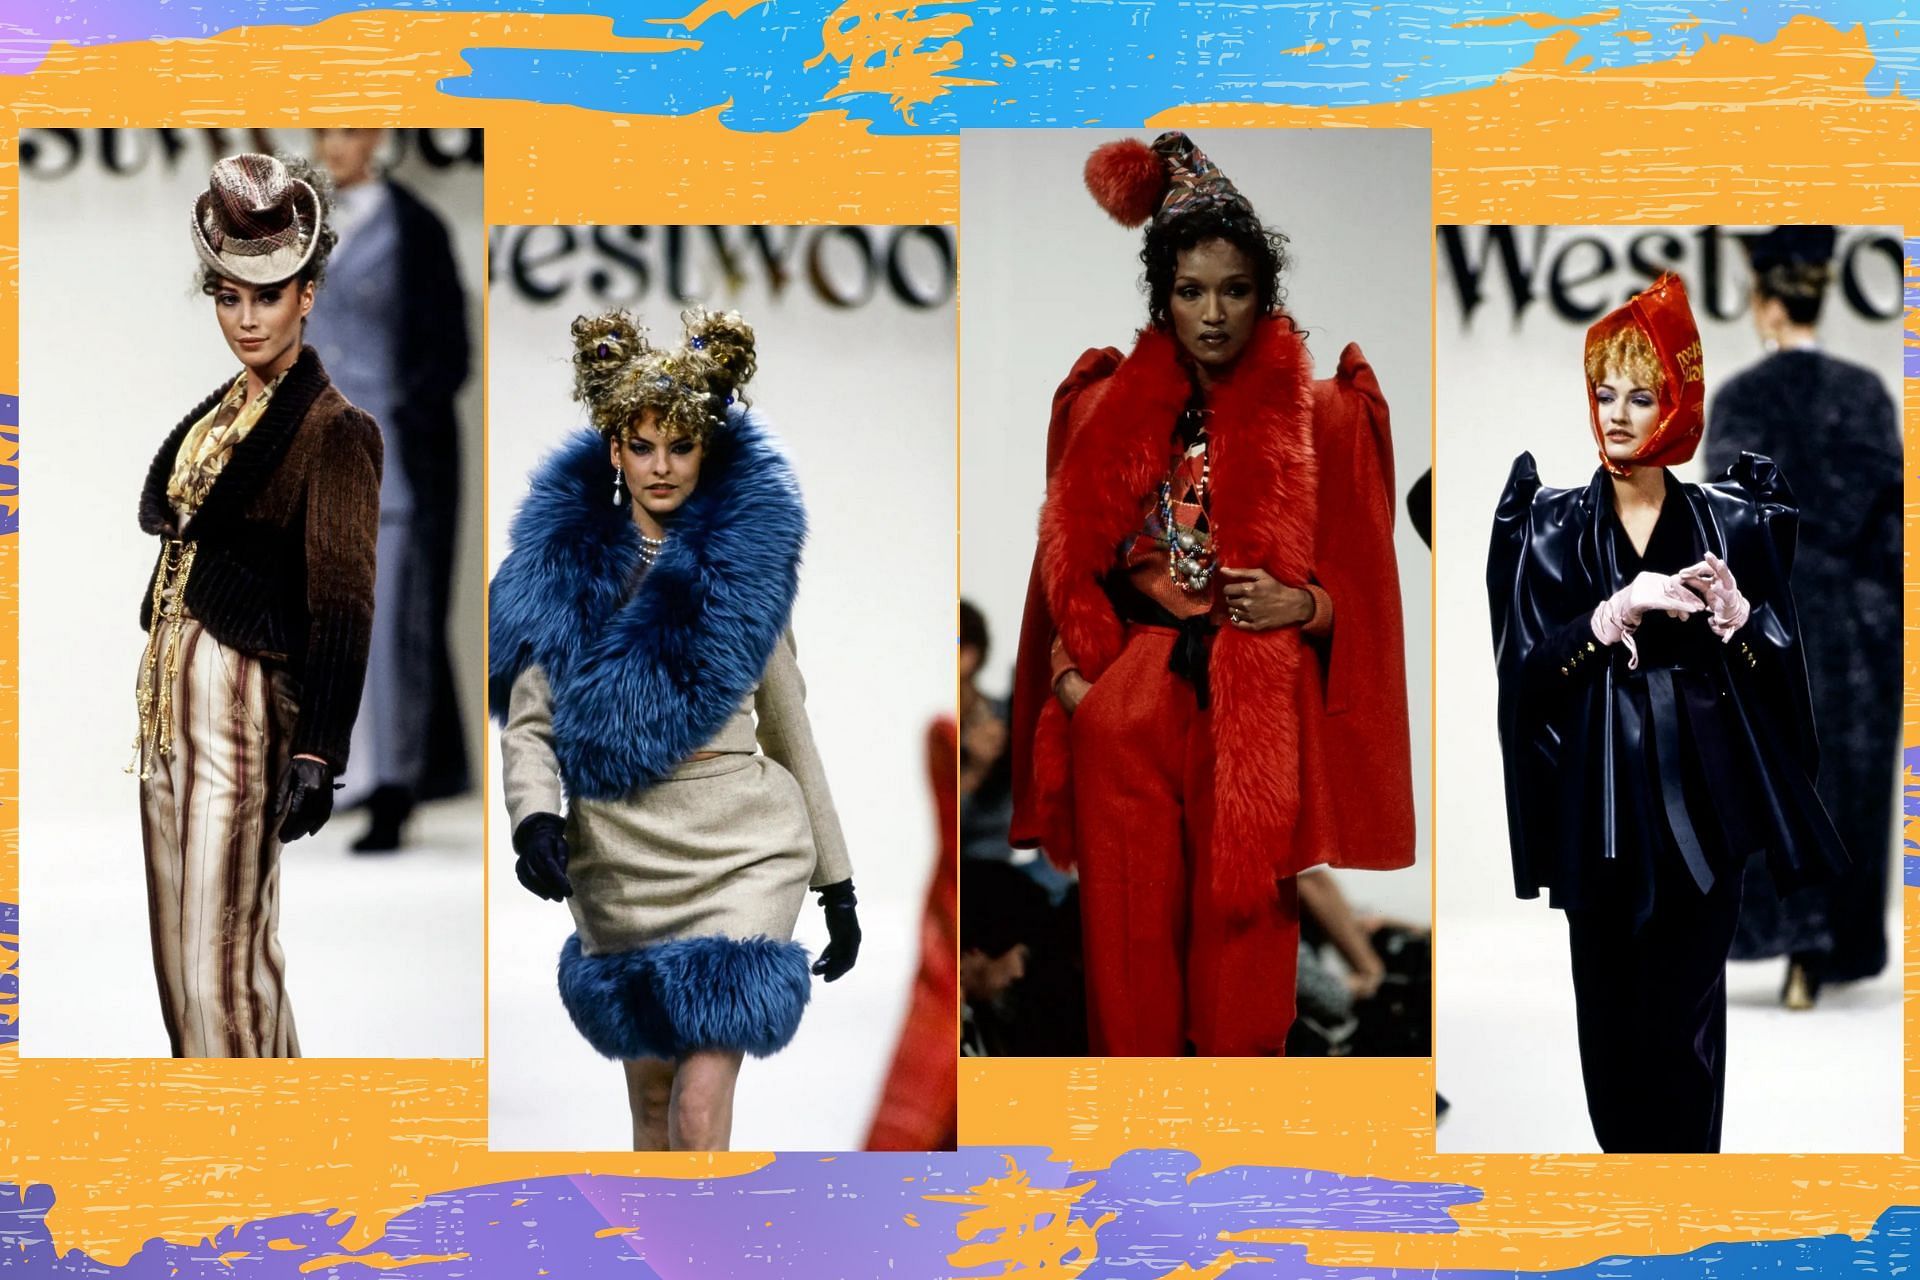 Vivienne Westwood's most iconic designs from her illustrious